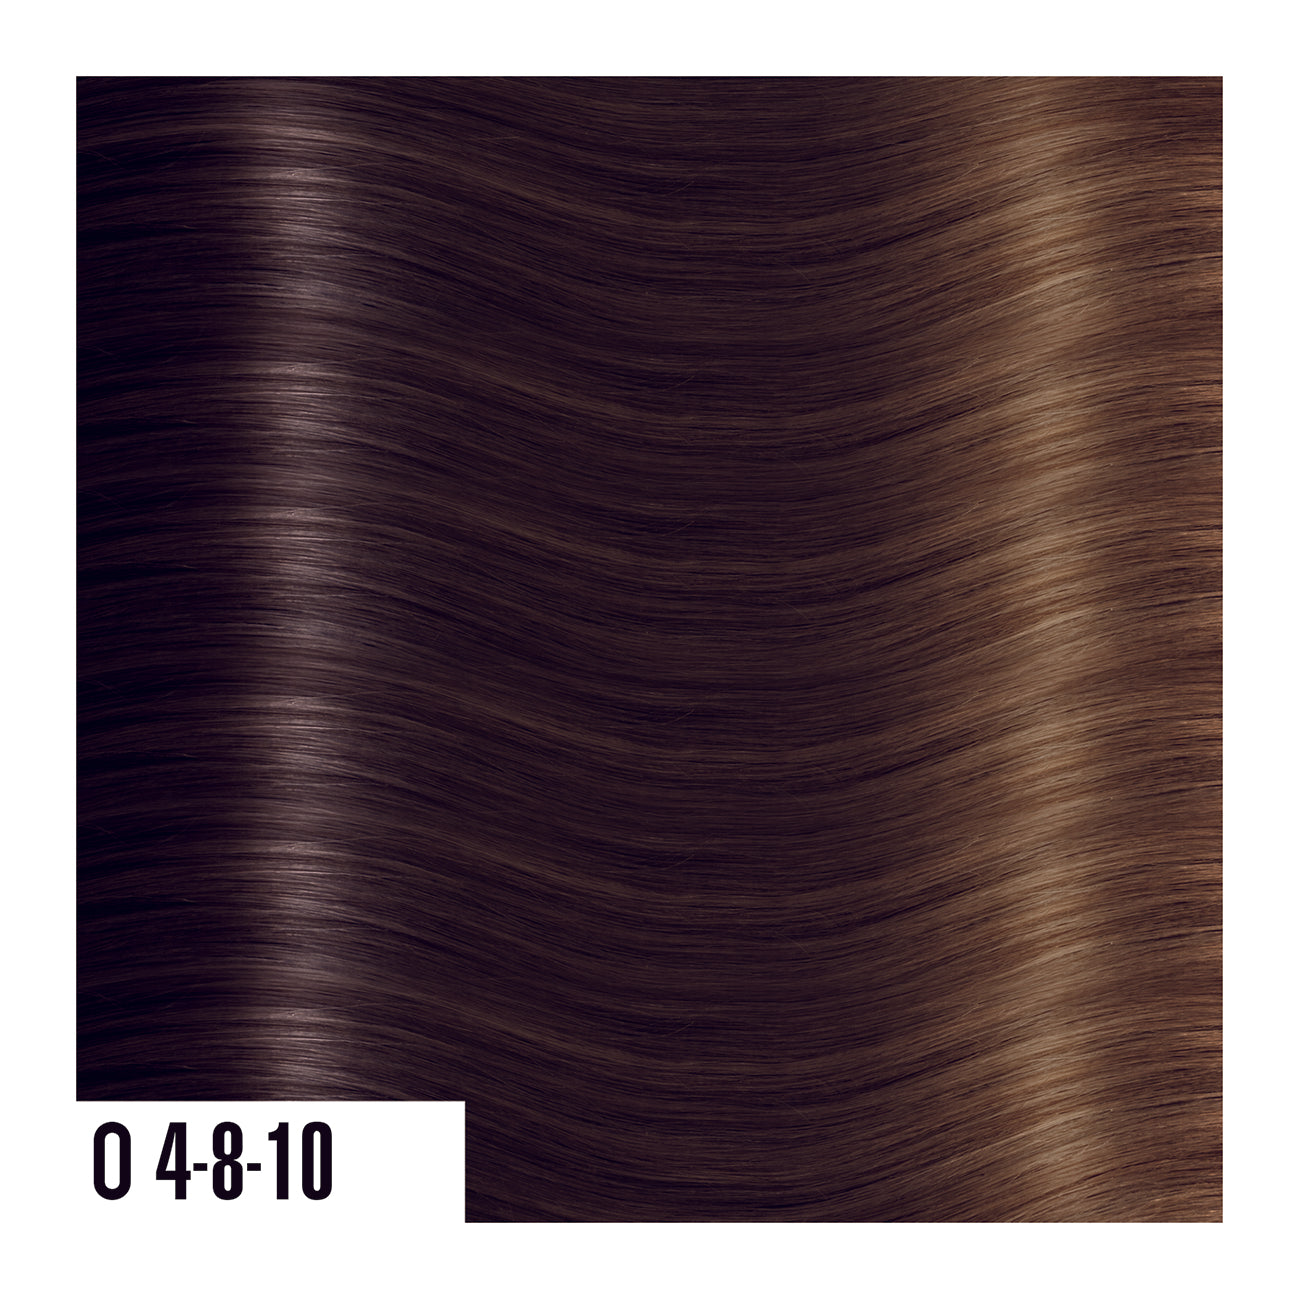 O4-8-10 - Prime Tape In Medium Brown Fade Into Light Brown -  Ombre colors are a beautiful gradual blend of 3 colors with darker roots and lighter ends. 